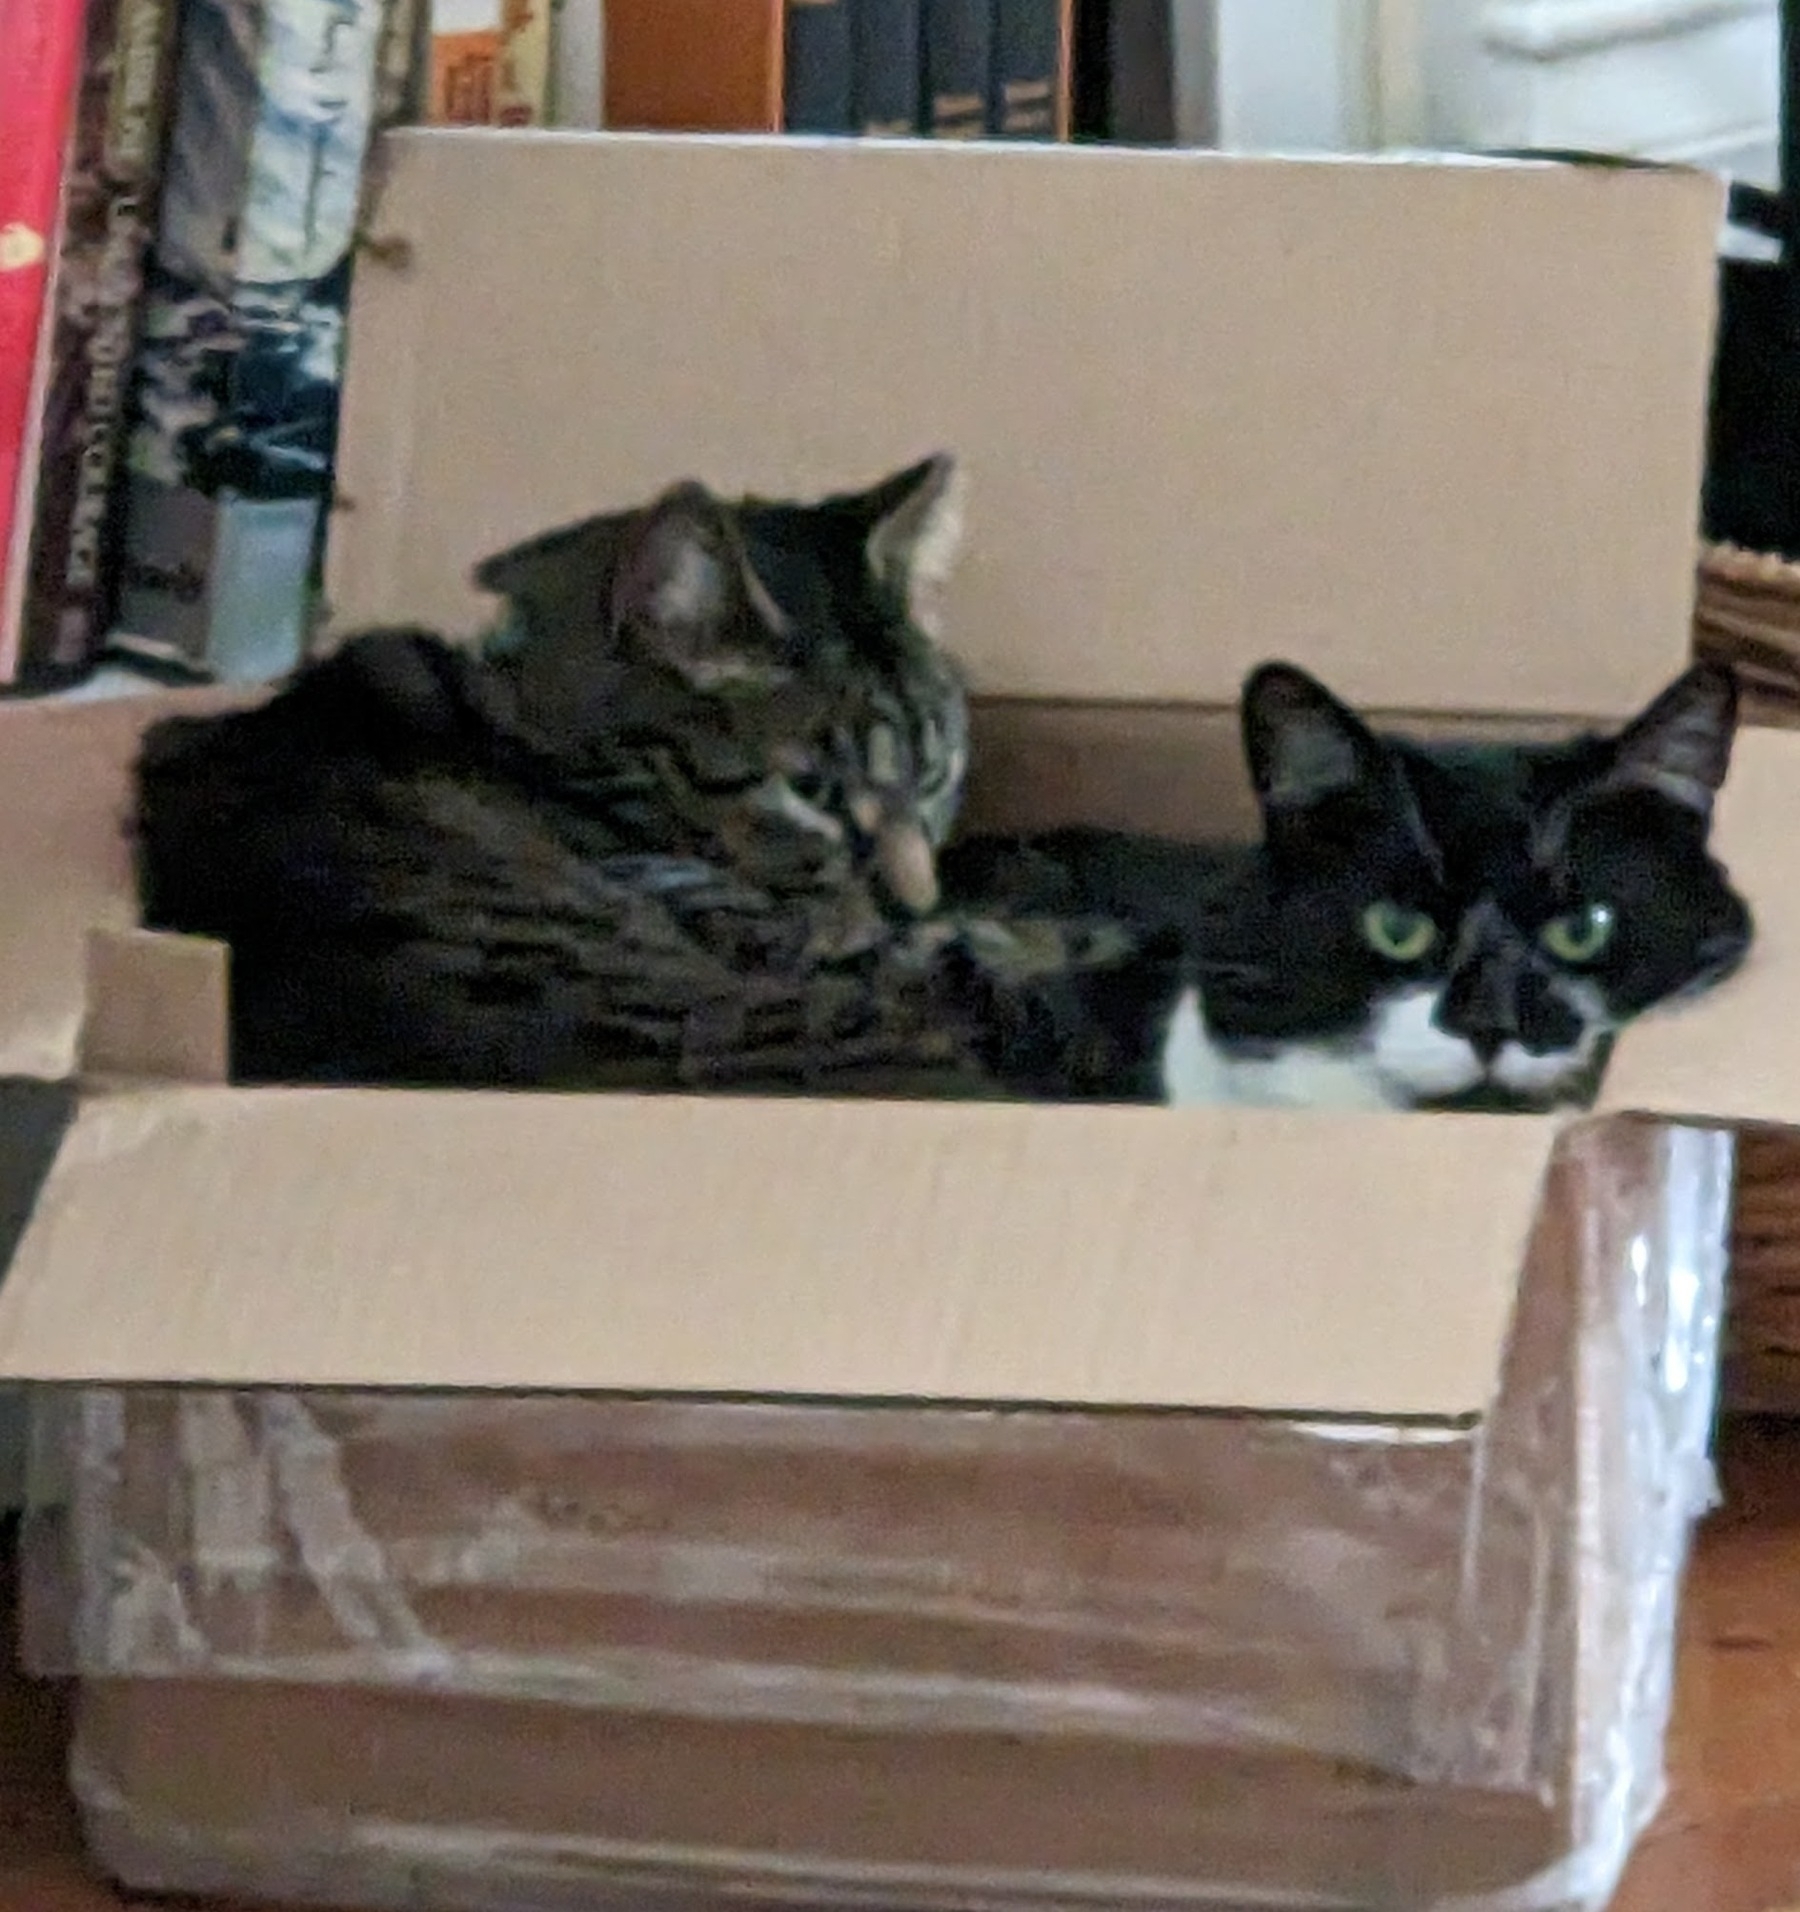 one cat lying on top of another cat, in an old box